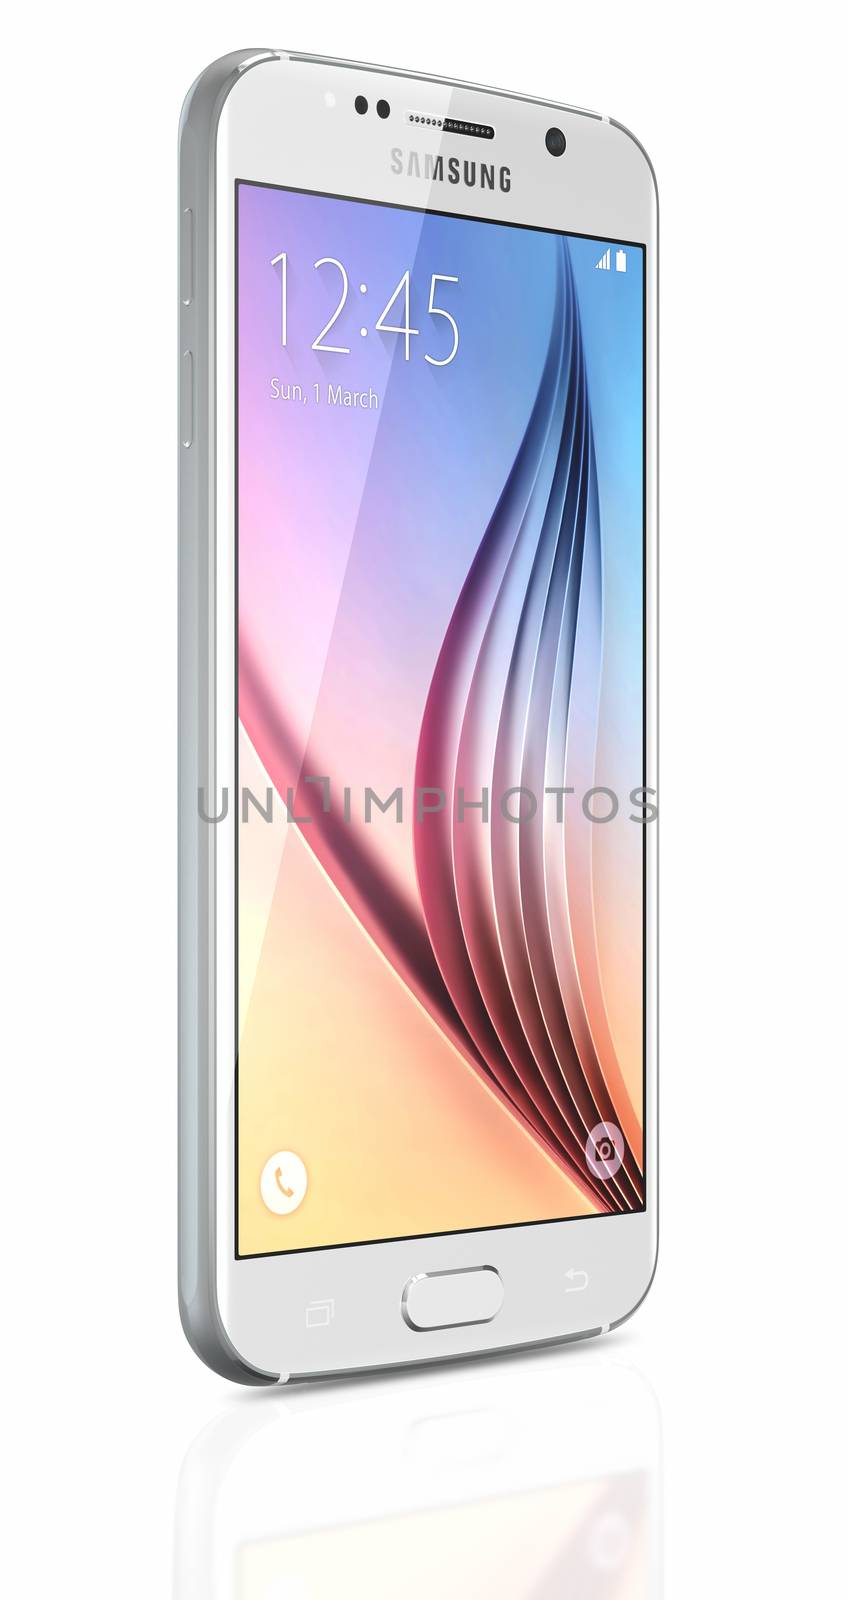 Galati, Romania - April 27, 2015: White Pearl Samsung Galaxy S6 smartphone on white background. The telephone is supported with 5.1" touch screen display and 1440 x 2560 pixels resolution.  The Samsung Galaxy S6 was launched at a press event in Barcelona on March 1 2015.